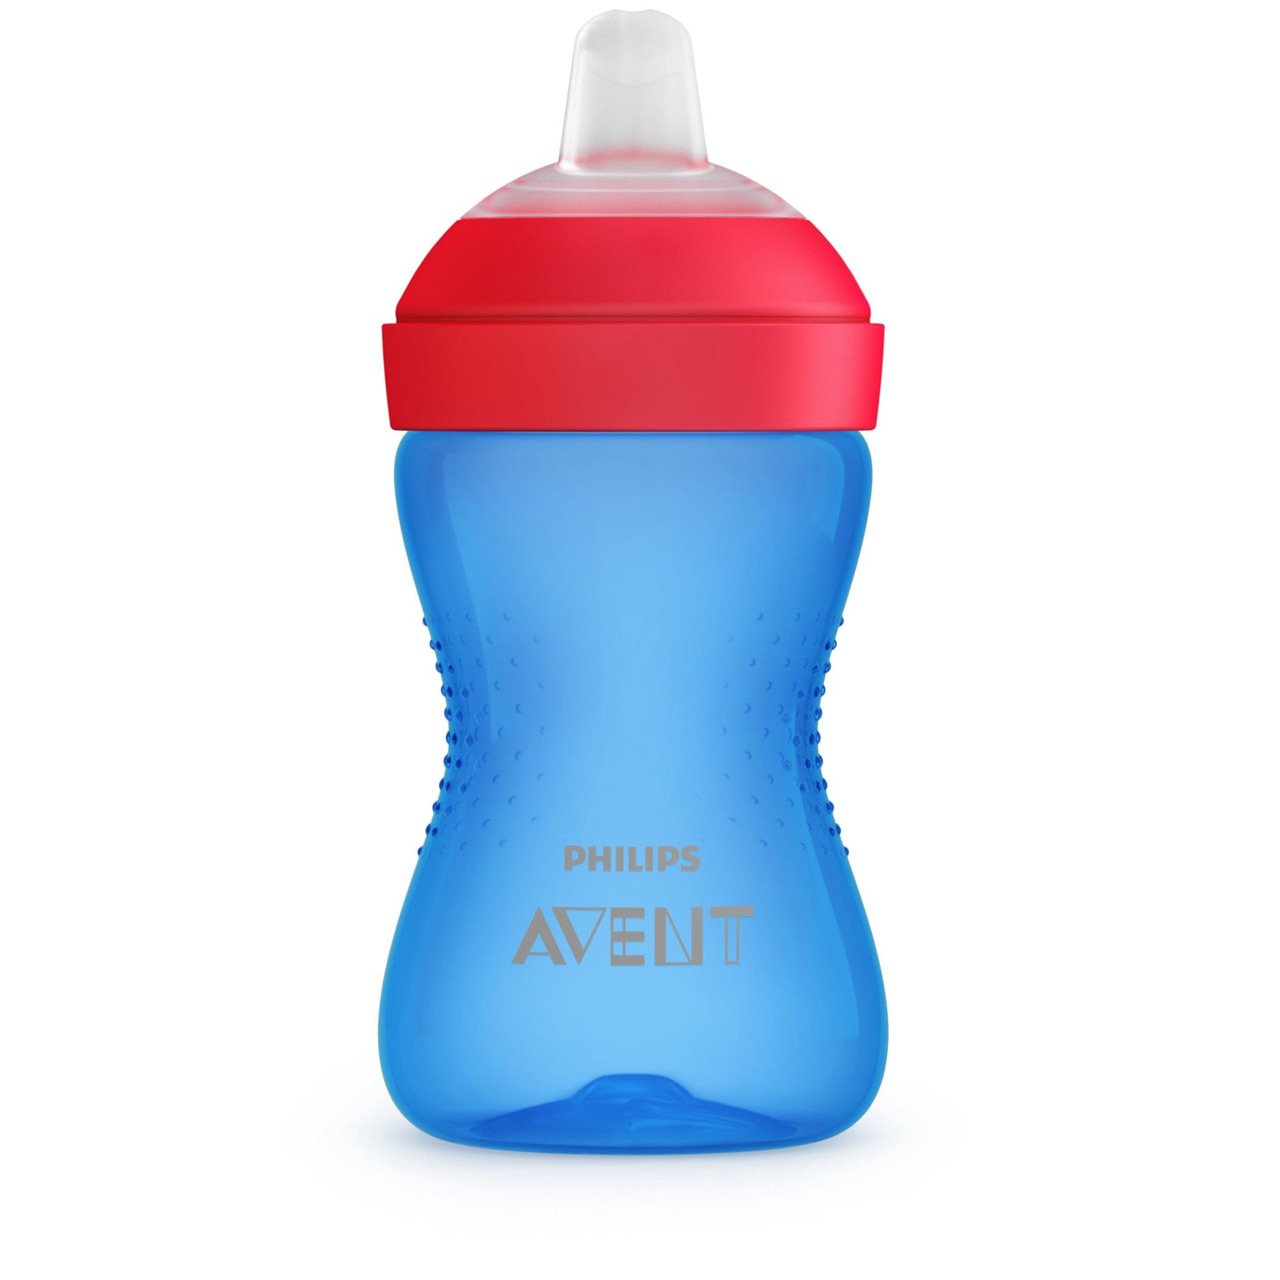 Philips Avent Beaker without Handles